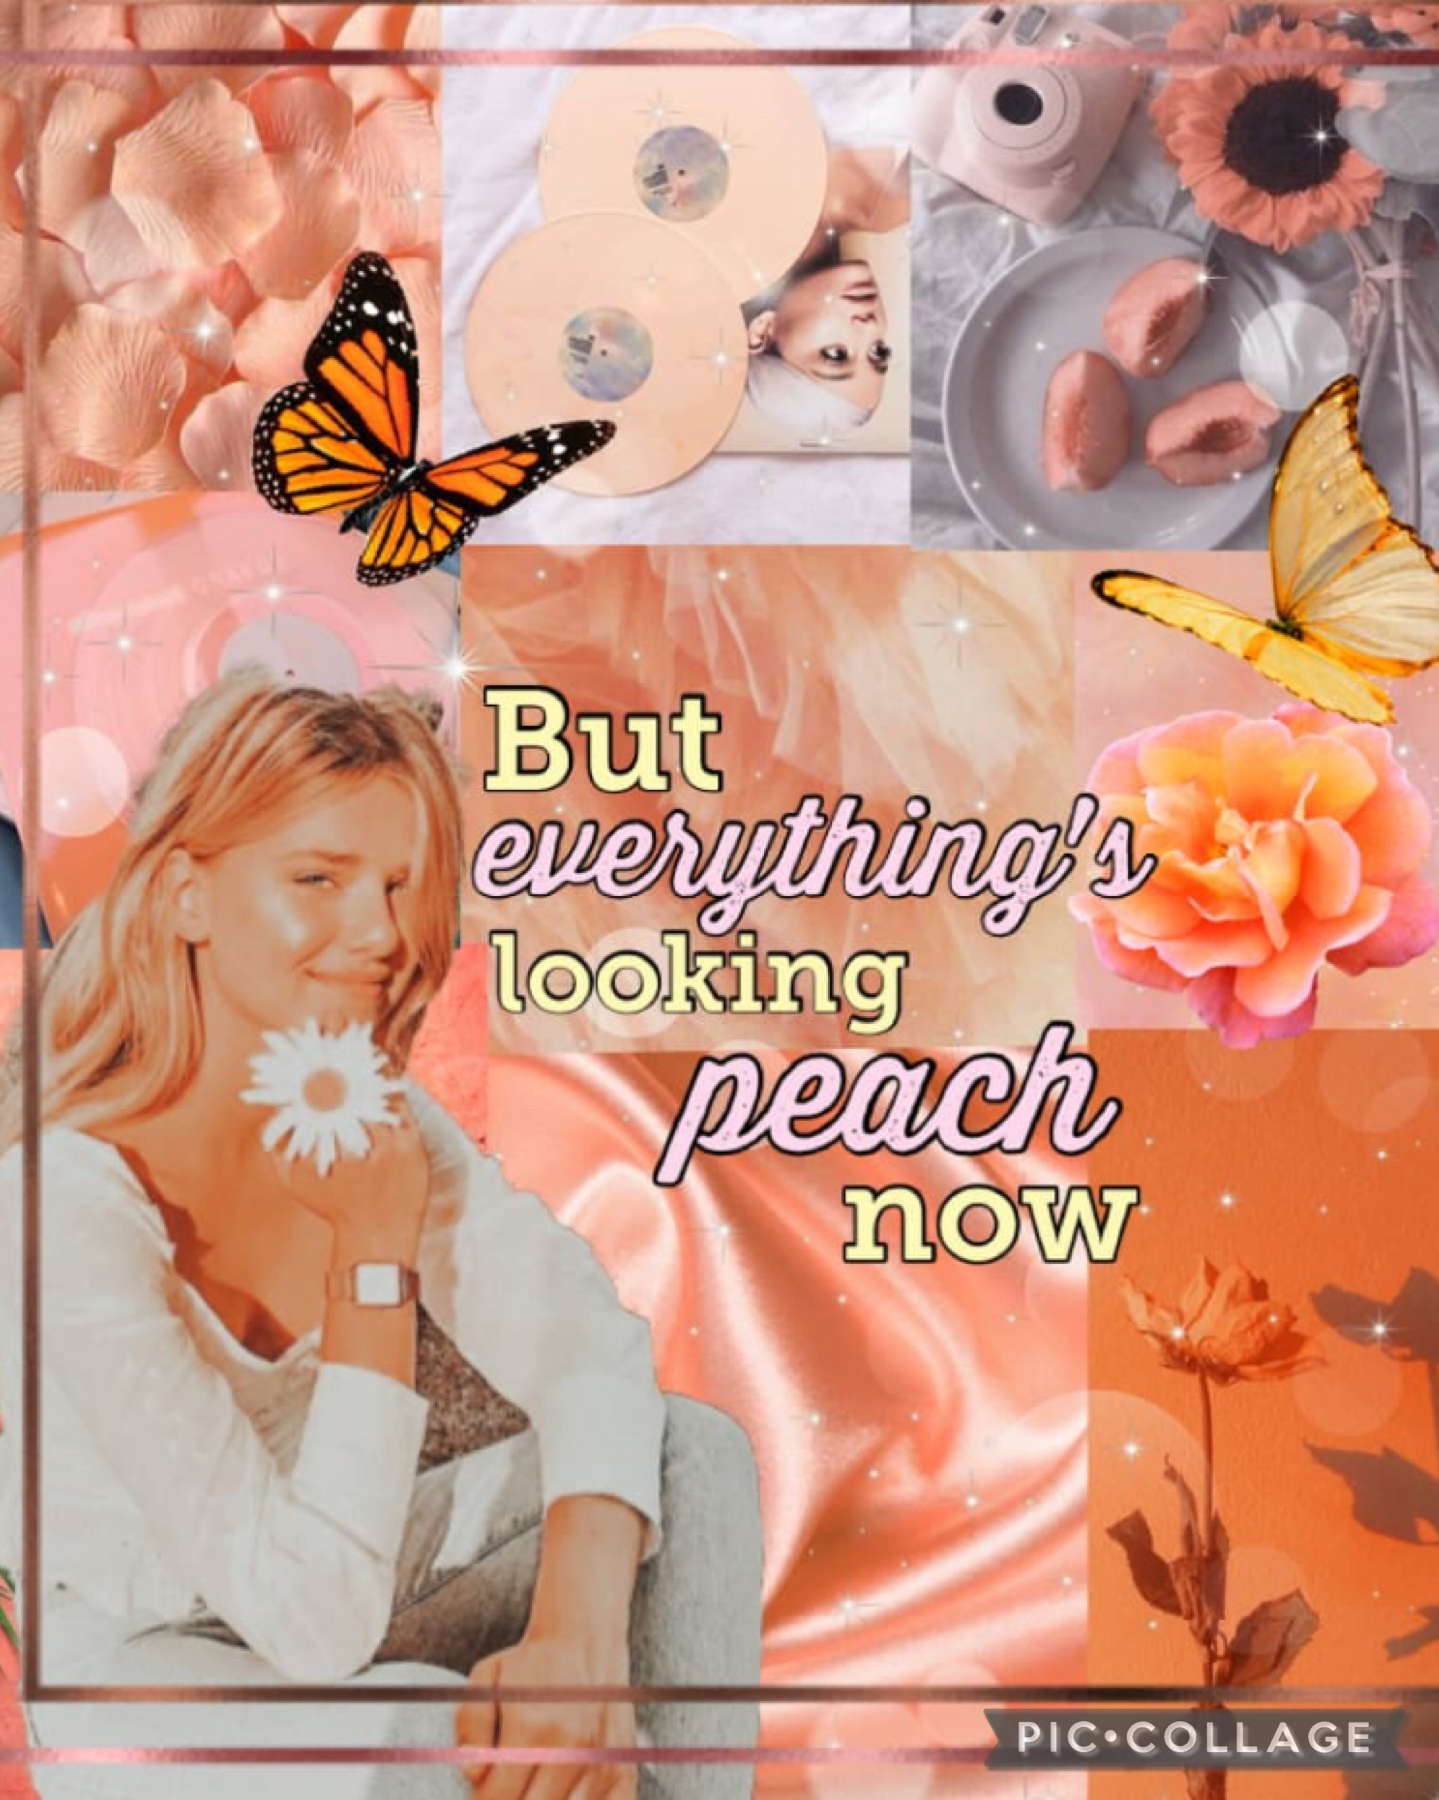 23.8.22 Peach aesthetic collage and entry to lemonsunsets contest